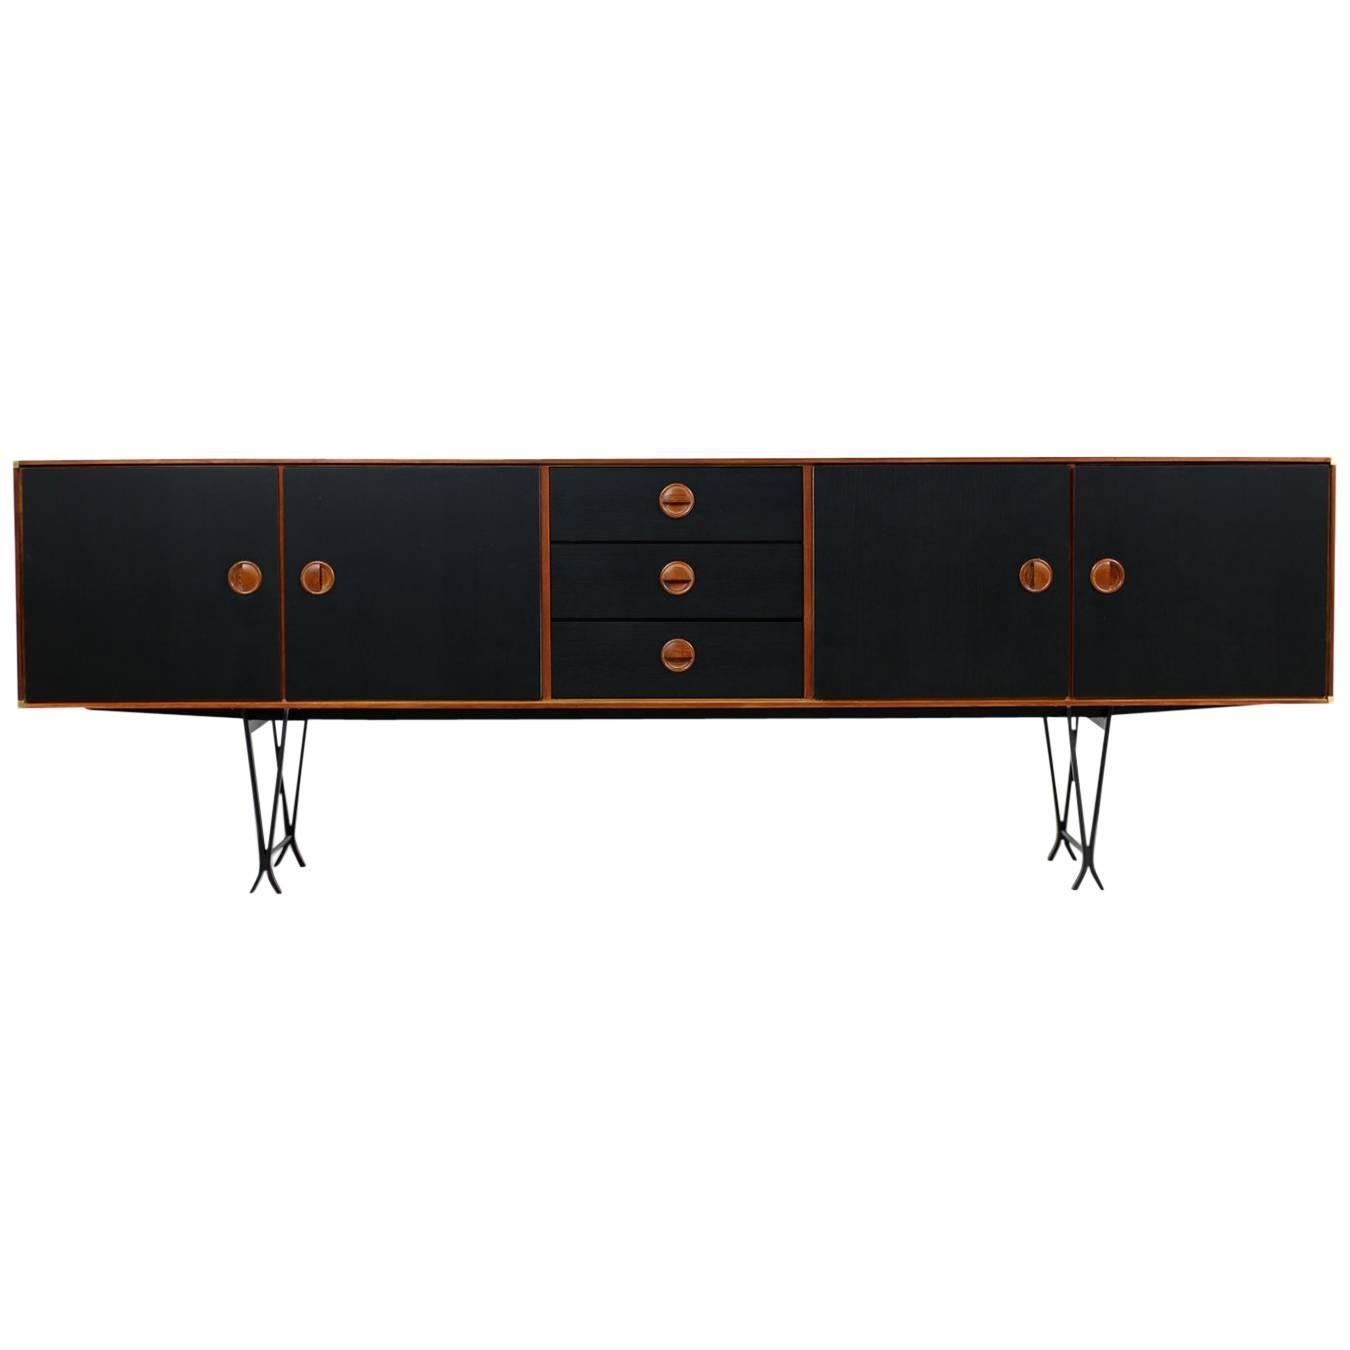 Large 1960s Teak & Black Sideboard by Fristho with Iron Base and Brass Details For Sale